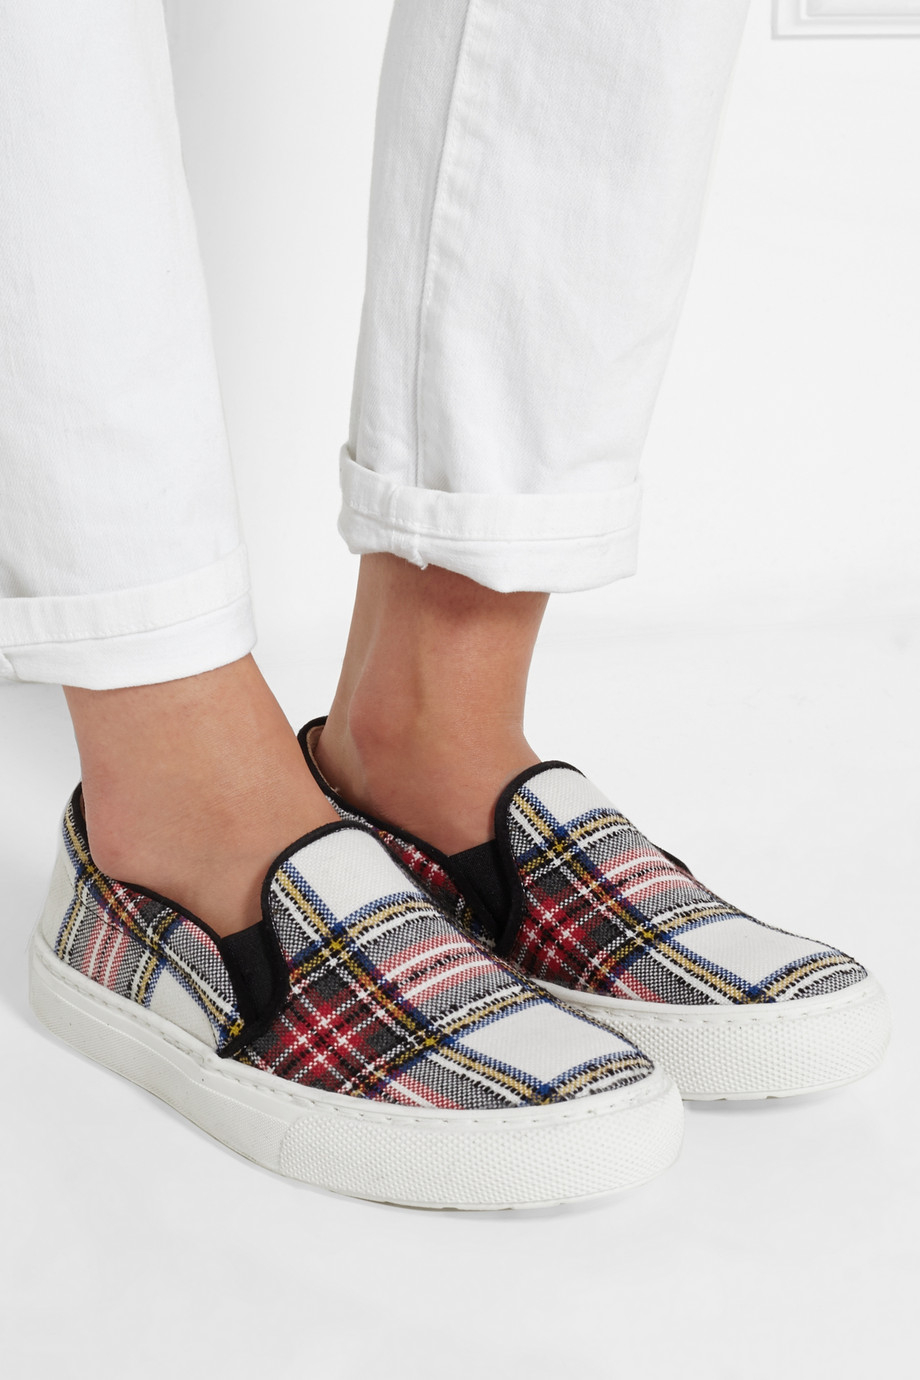 Markus lupfer Plaid Canvas Slip-On Sneakers in White | Lyst